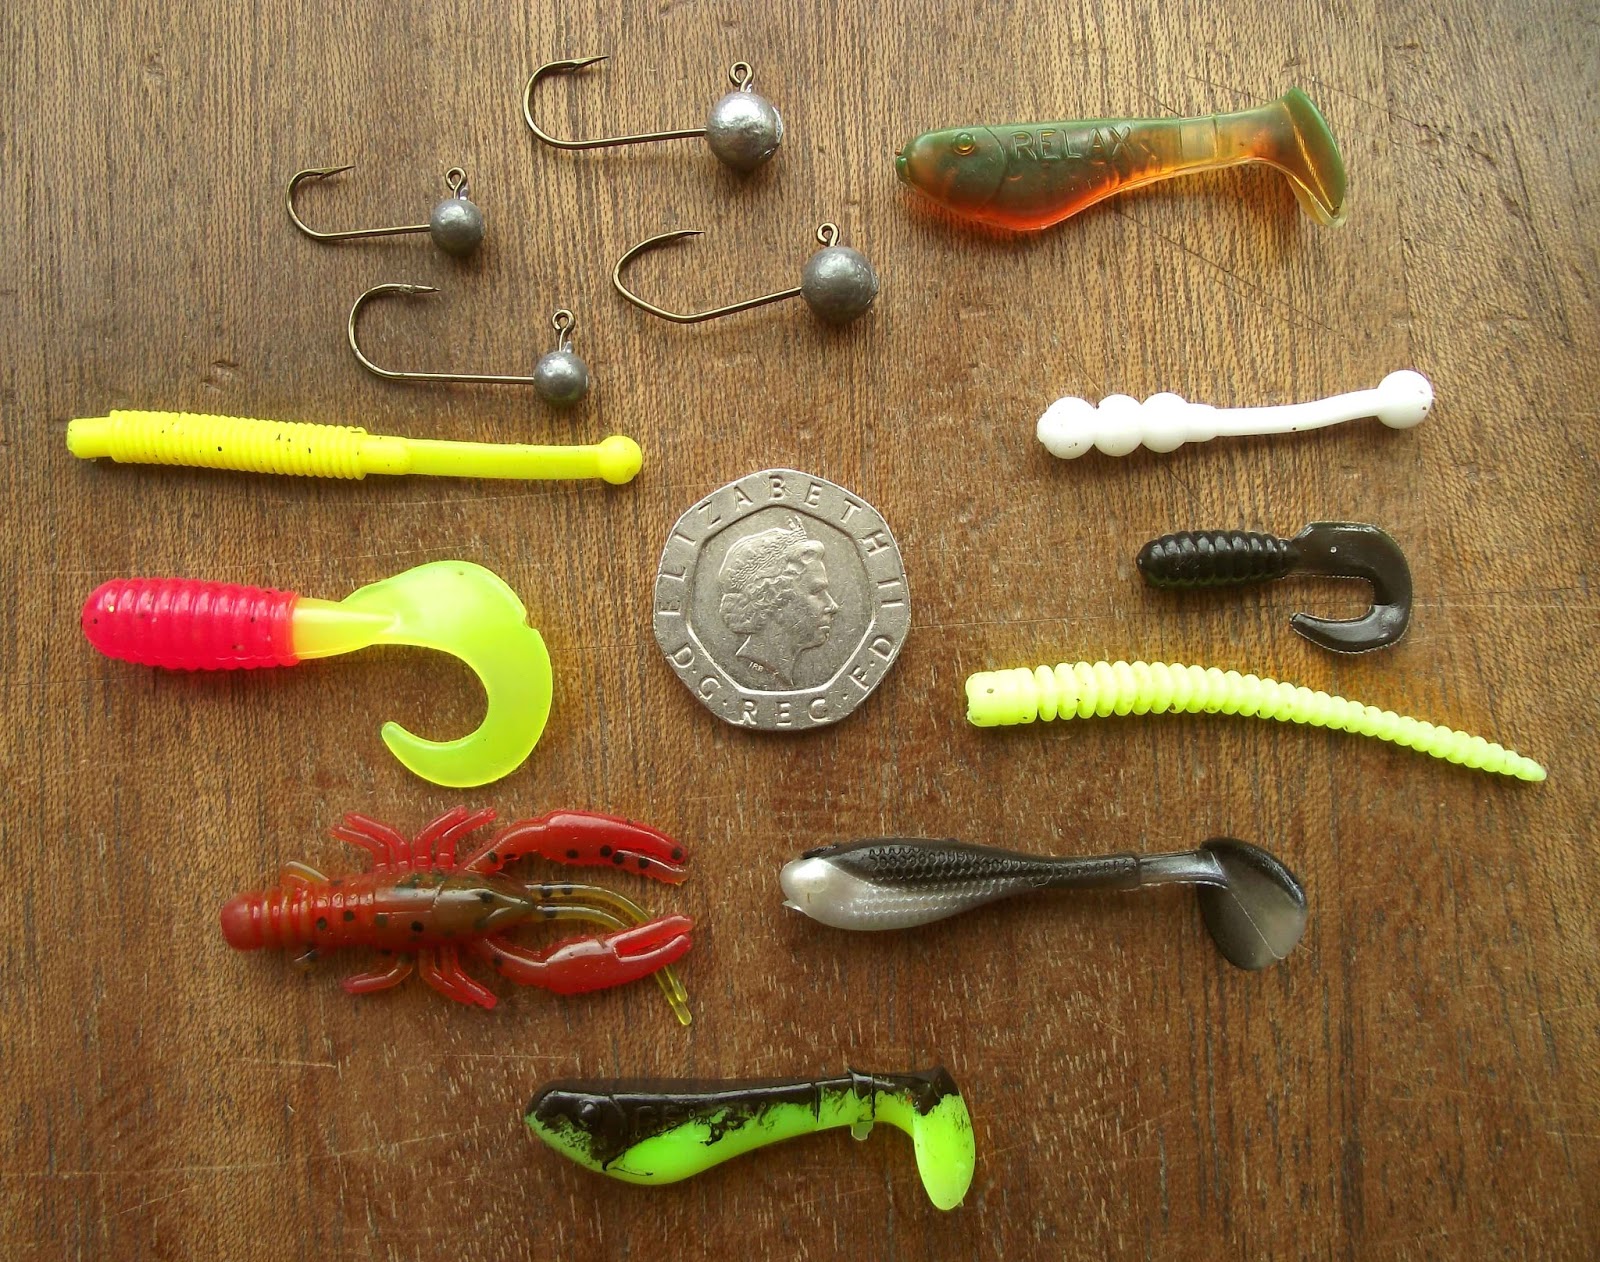 The Lure of Angling: Lure fishing microcosm.